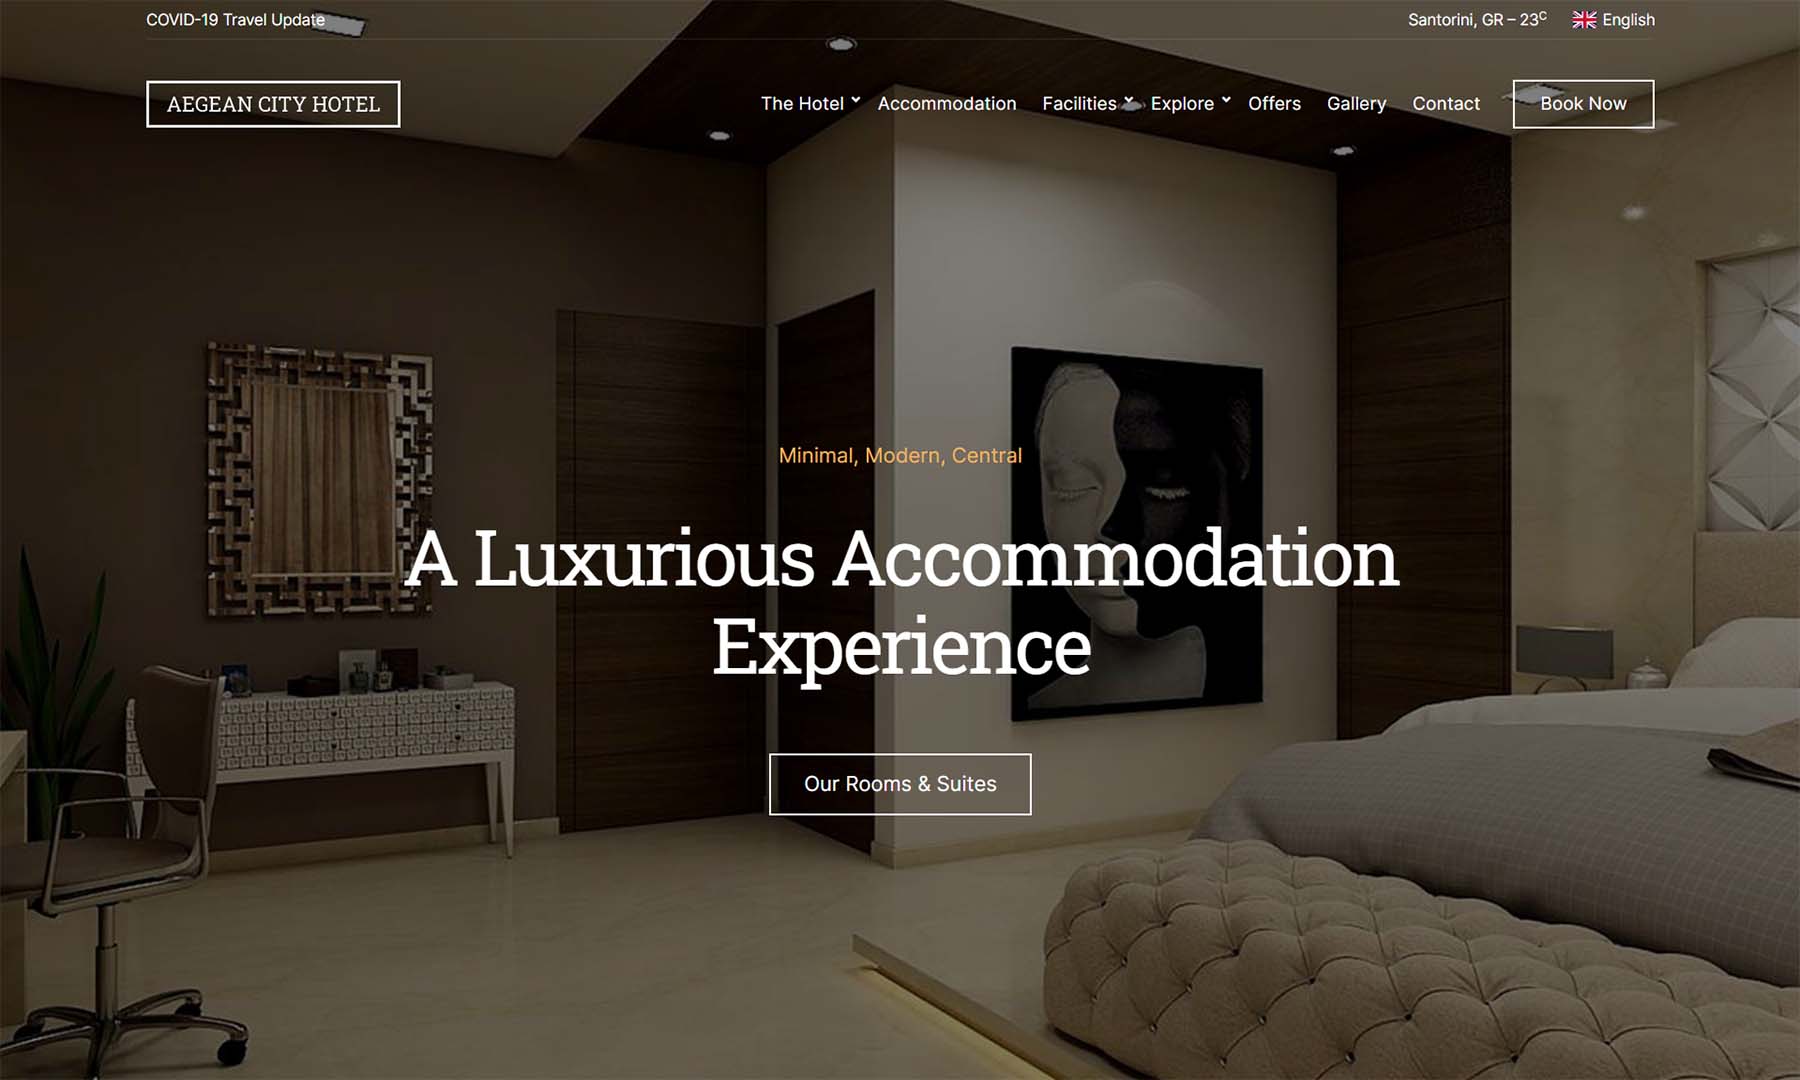 Aegean Resort is one of the best WordPress travel themes